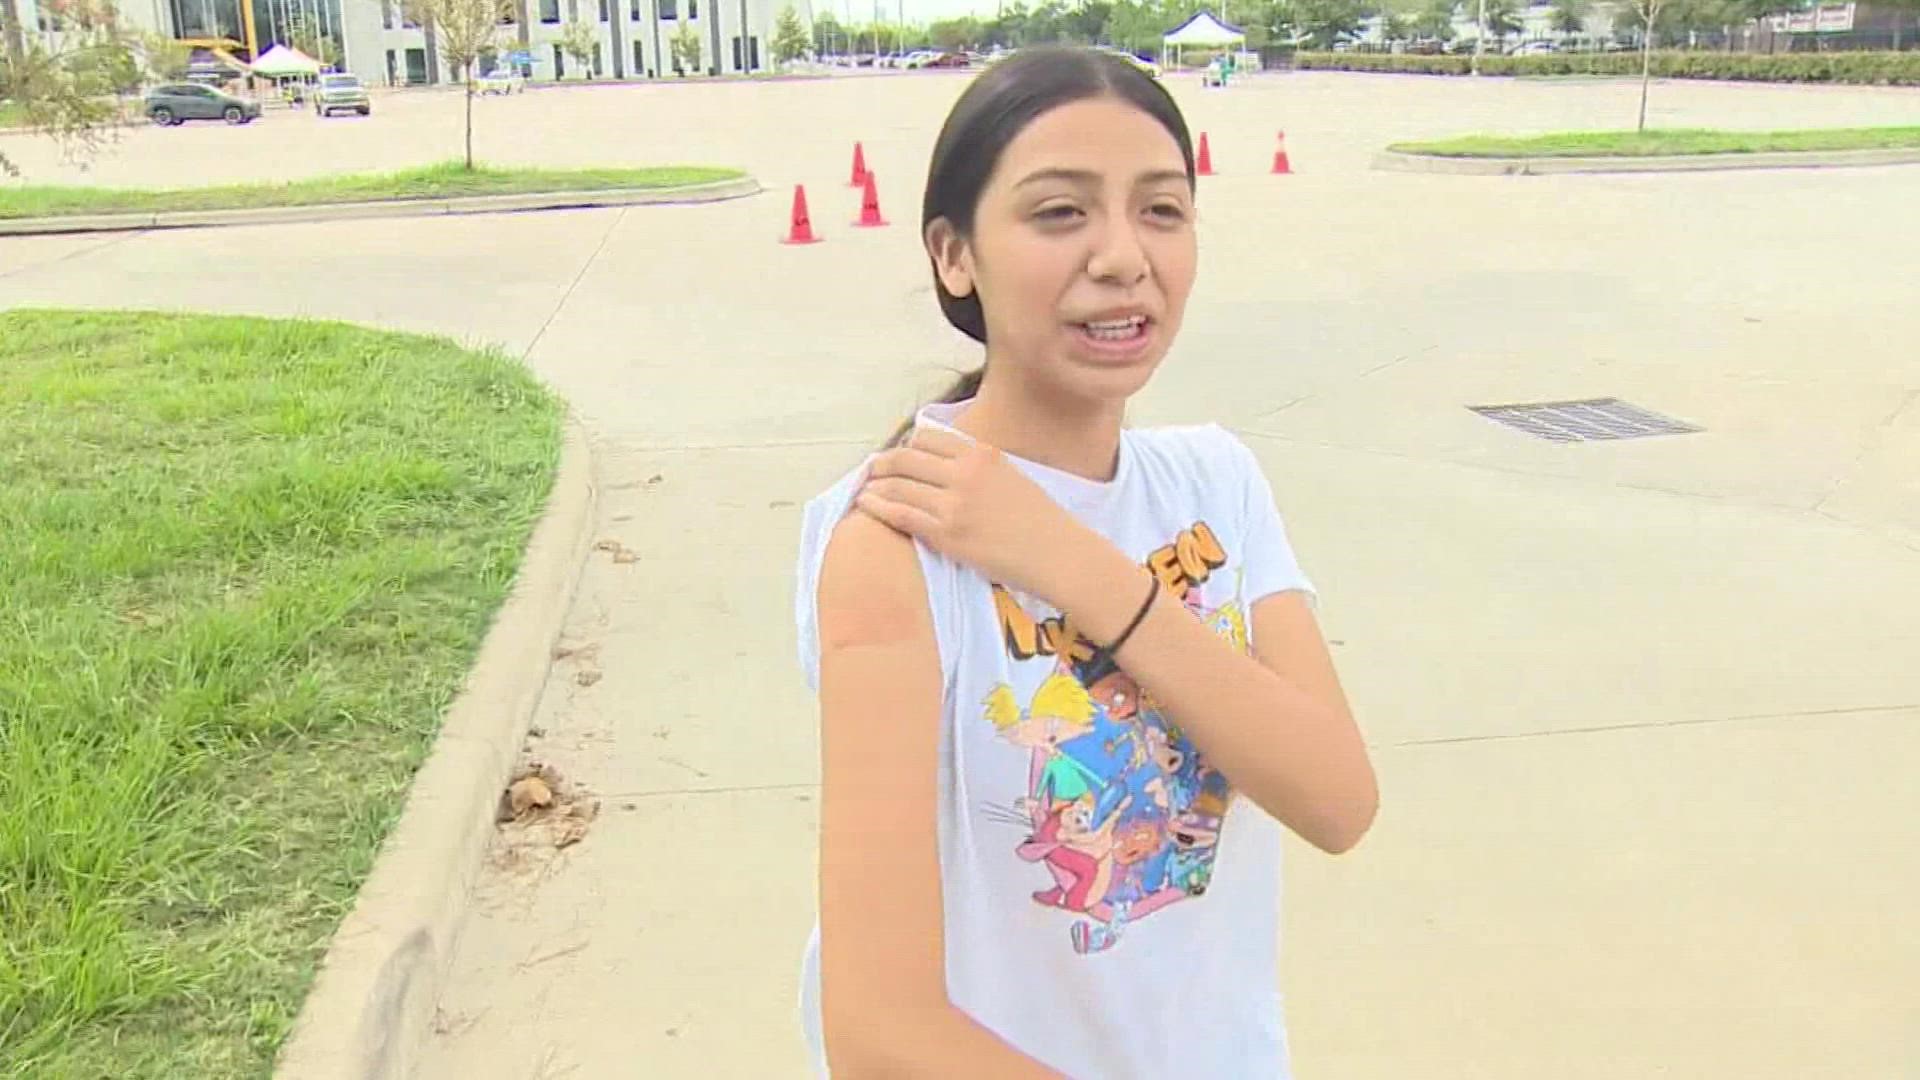 One student said seeing her mother suffer from COVID prompted her to get the vaccination.